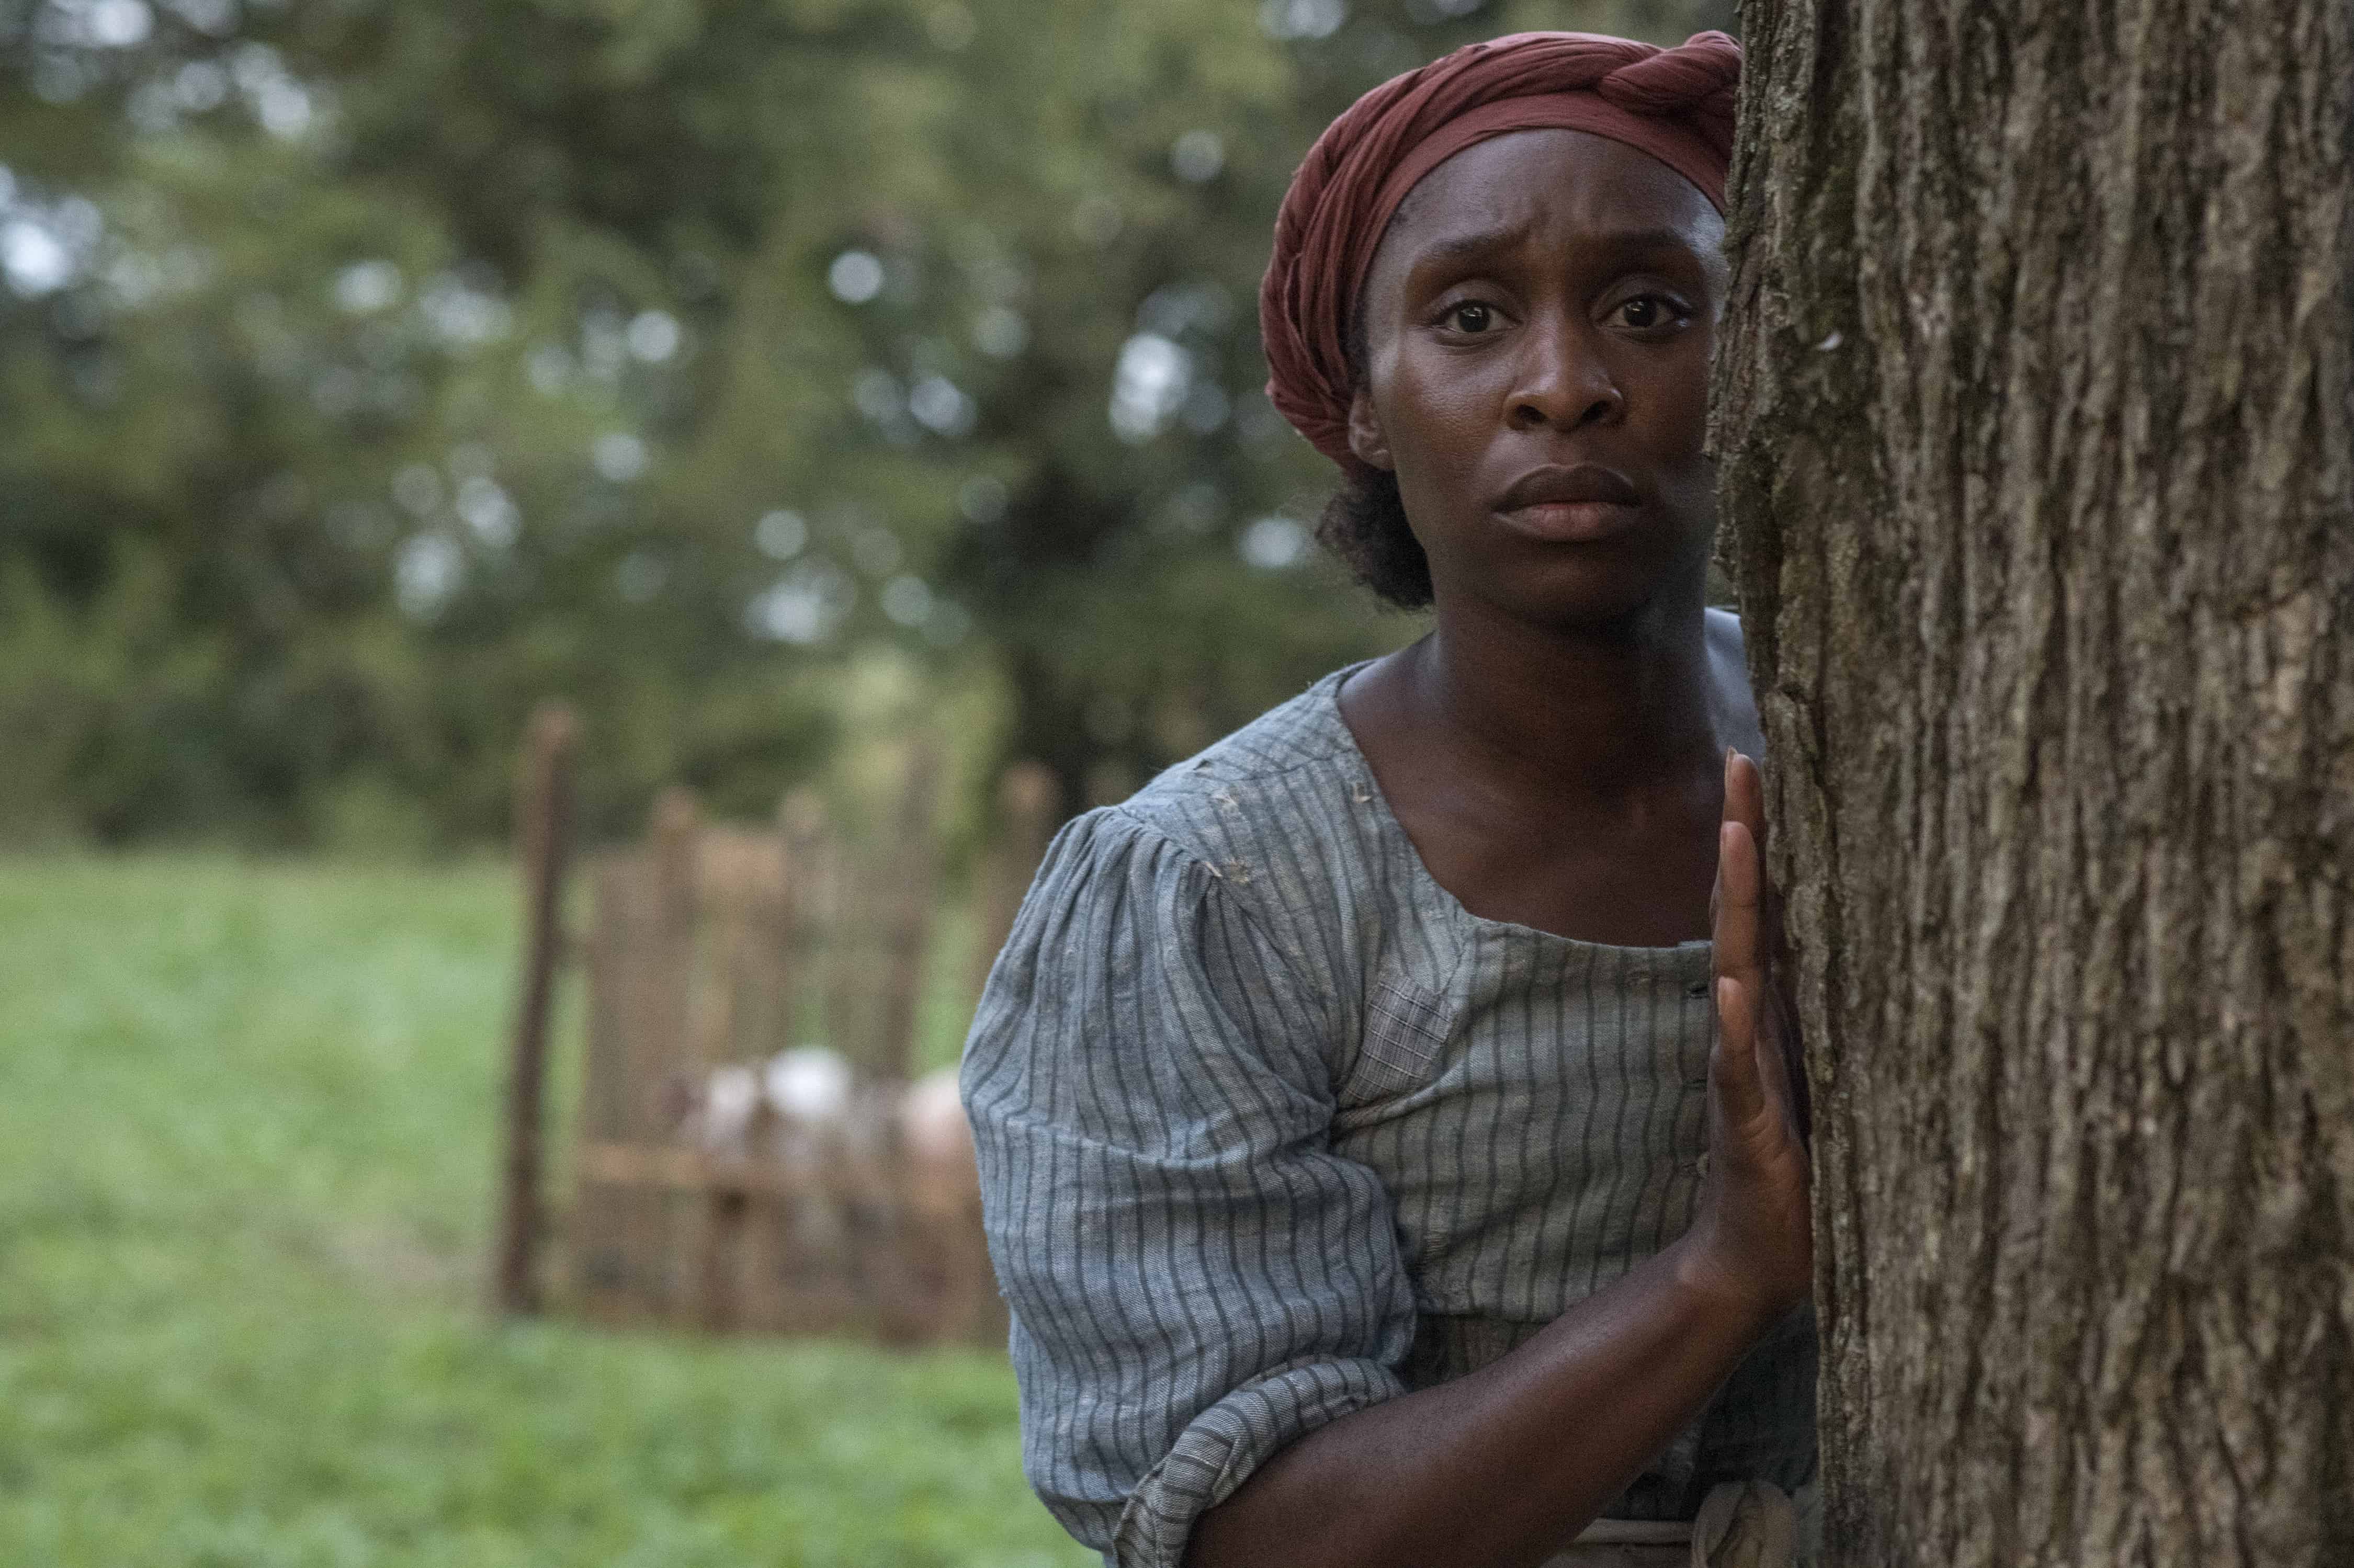 Harriet will be in theaters November 1, 2019